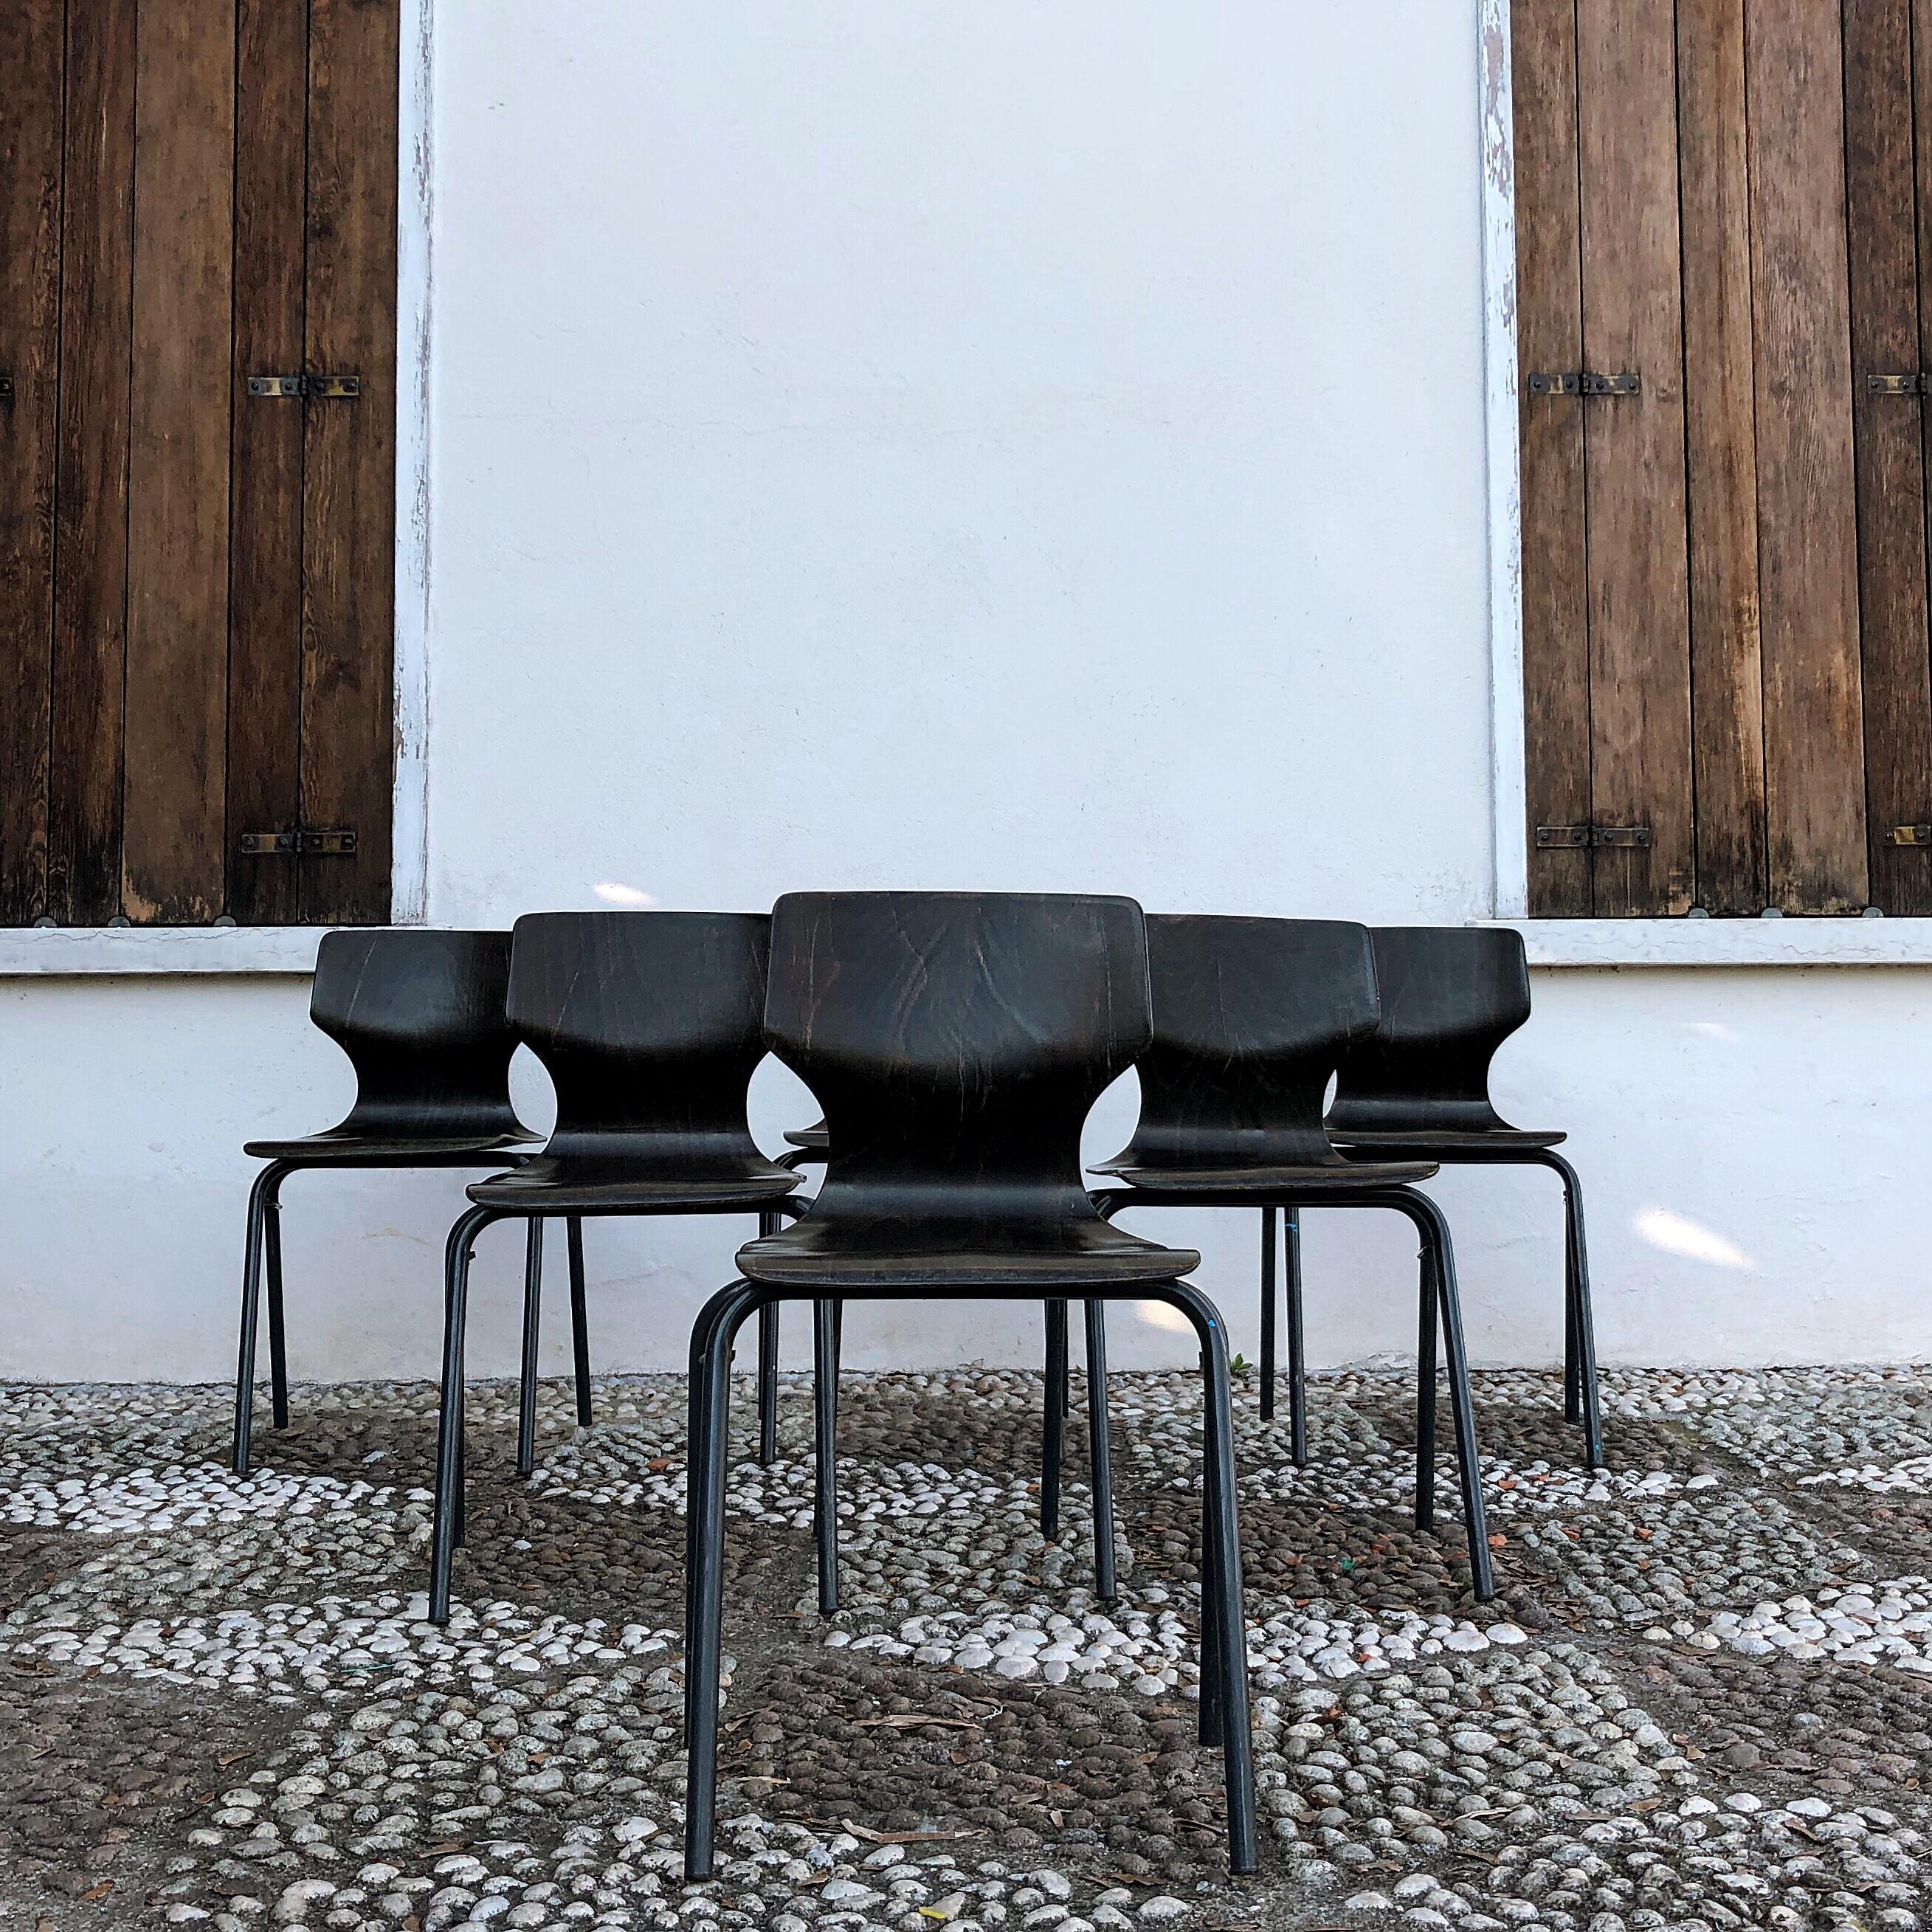 Late 20th Century Adam Stegner Plywood Midcentury Sculpted Chairs for Pagholz Flottöto, 1971 For Sale